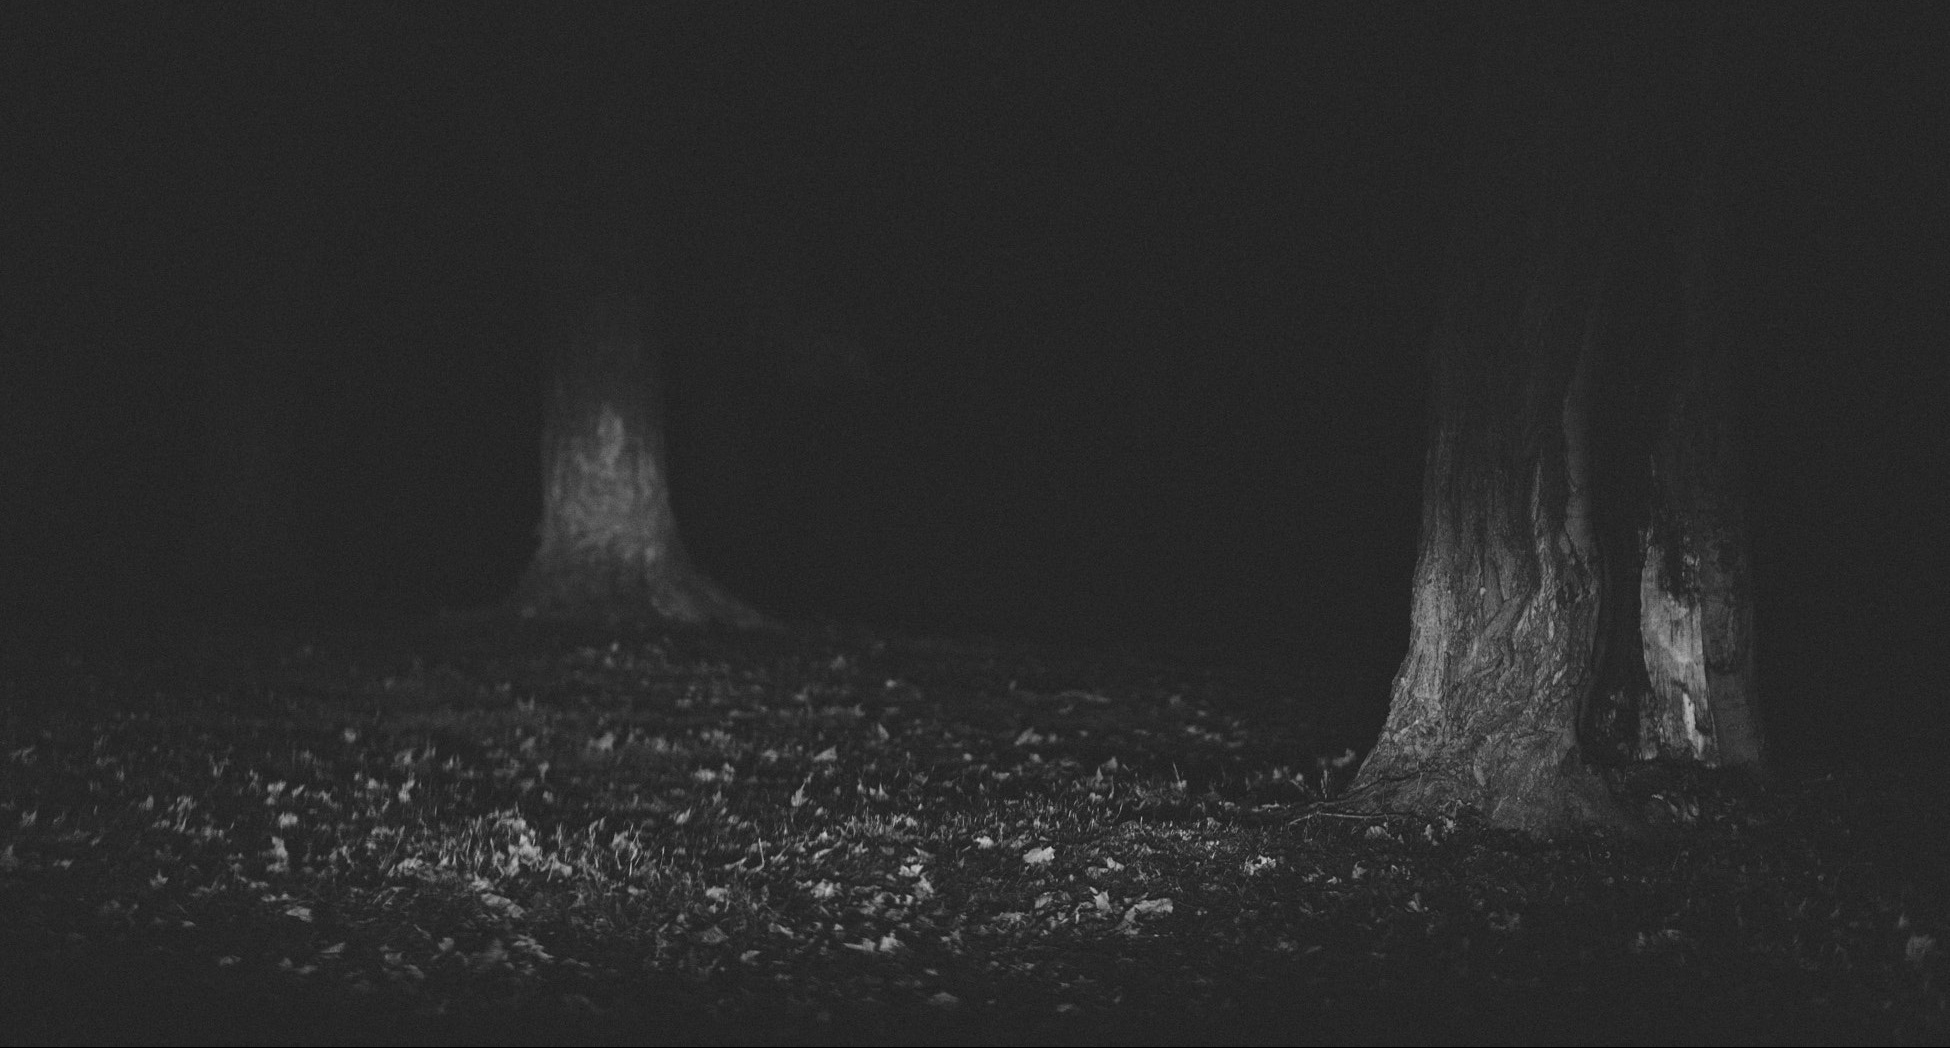 black and white photo of a spooky forest at night to get you in the Halloween mood!